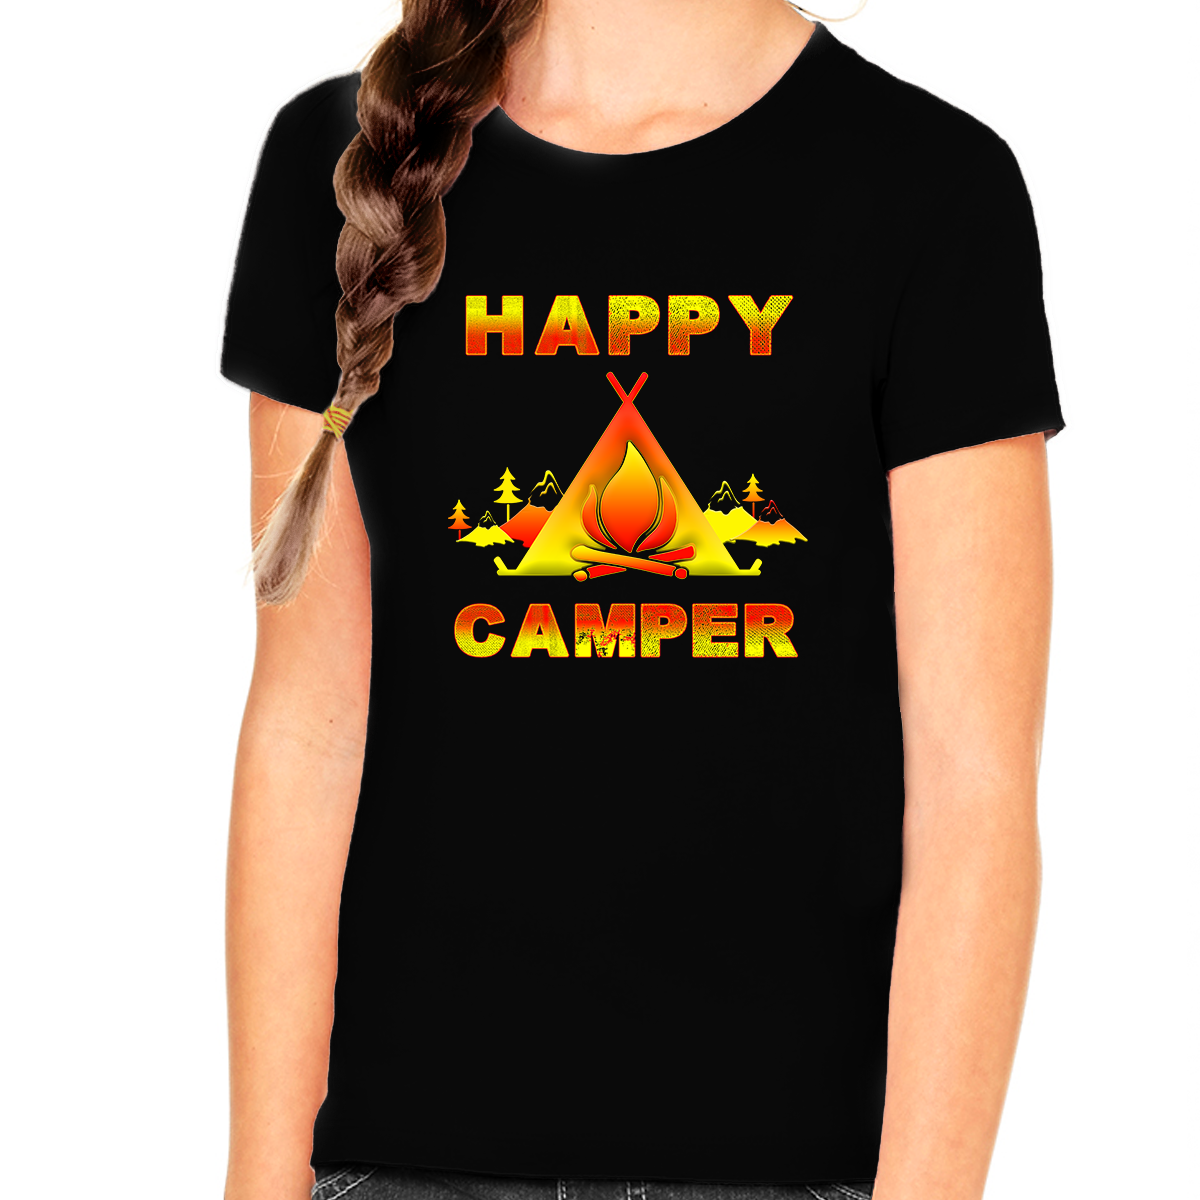 Camping Shirt for Girls - Camping Clothes for Girls - Happy Camper Camping Shirts for Kids Funny - image 1 of 9